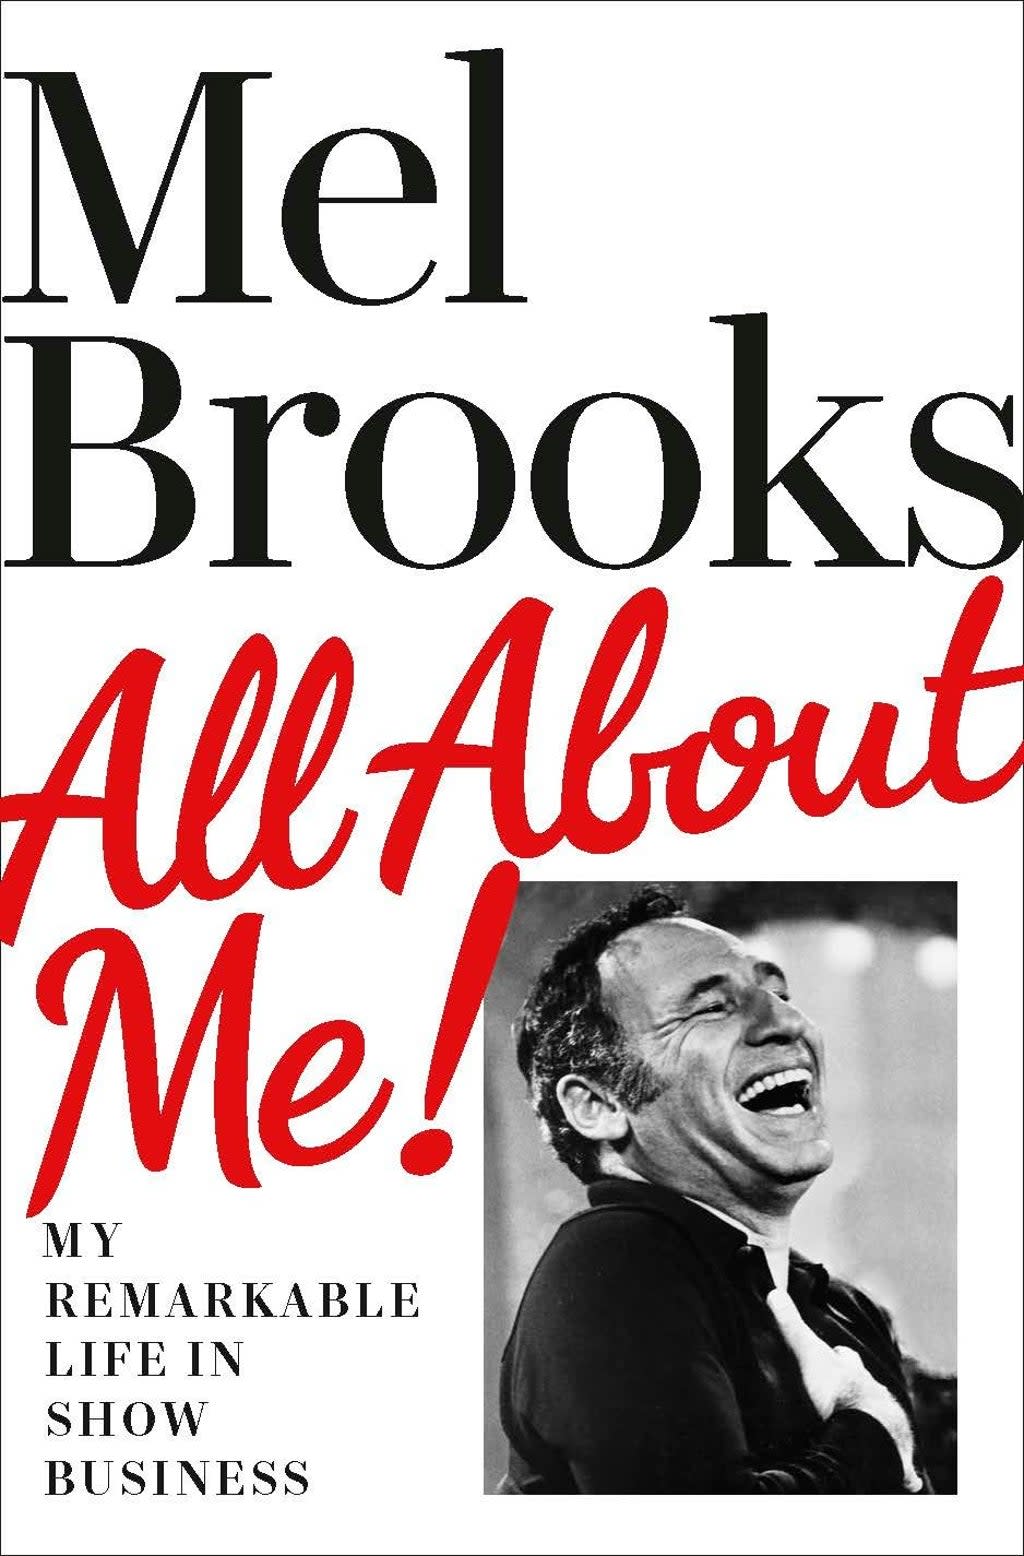 Book Review - All About Me (ASSOCIATED PRESS)